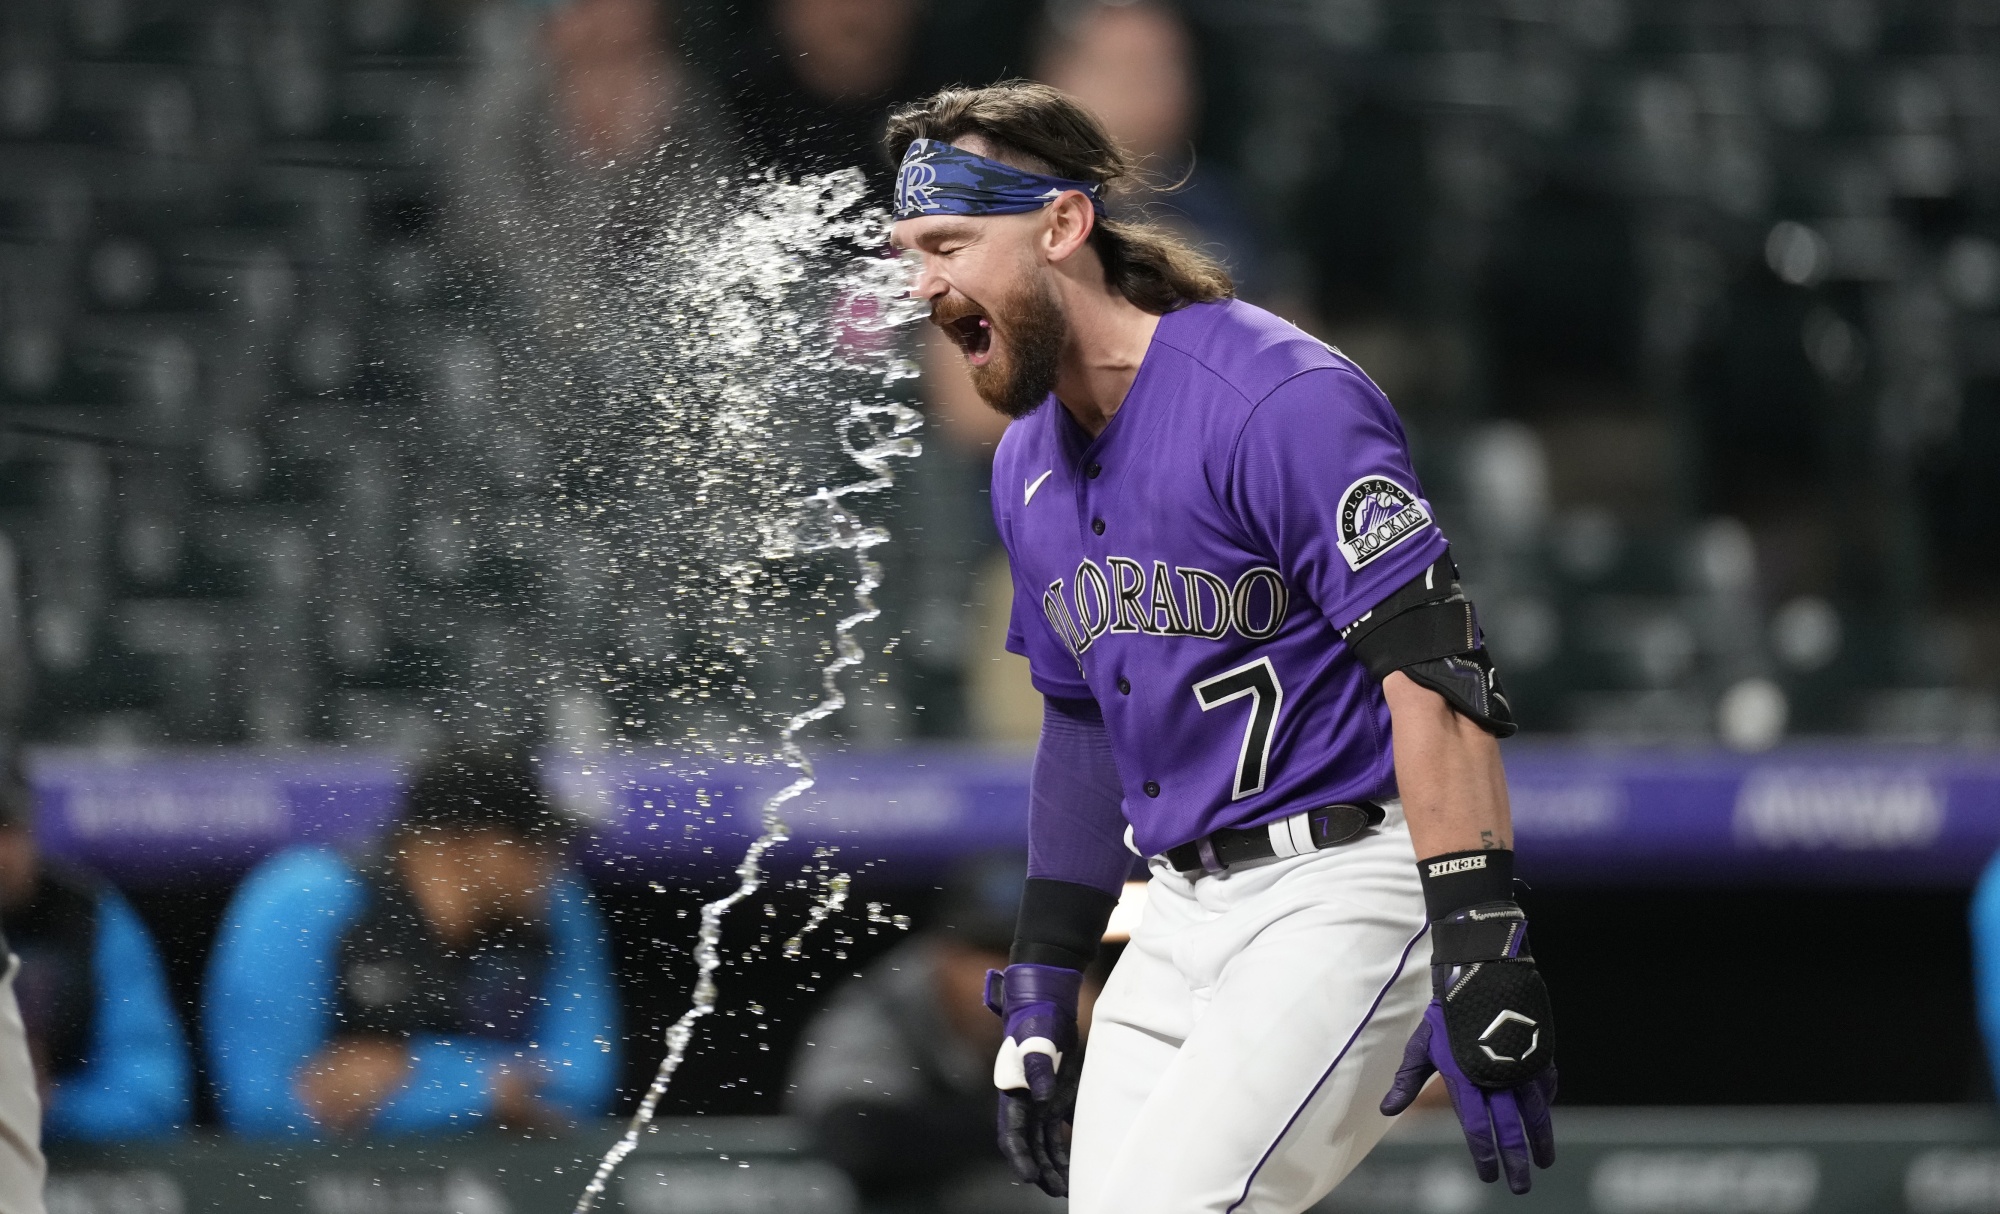 Rodgers' 3-homer Game Gives Rockies DH Split With Marlins - Bloomberg